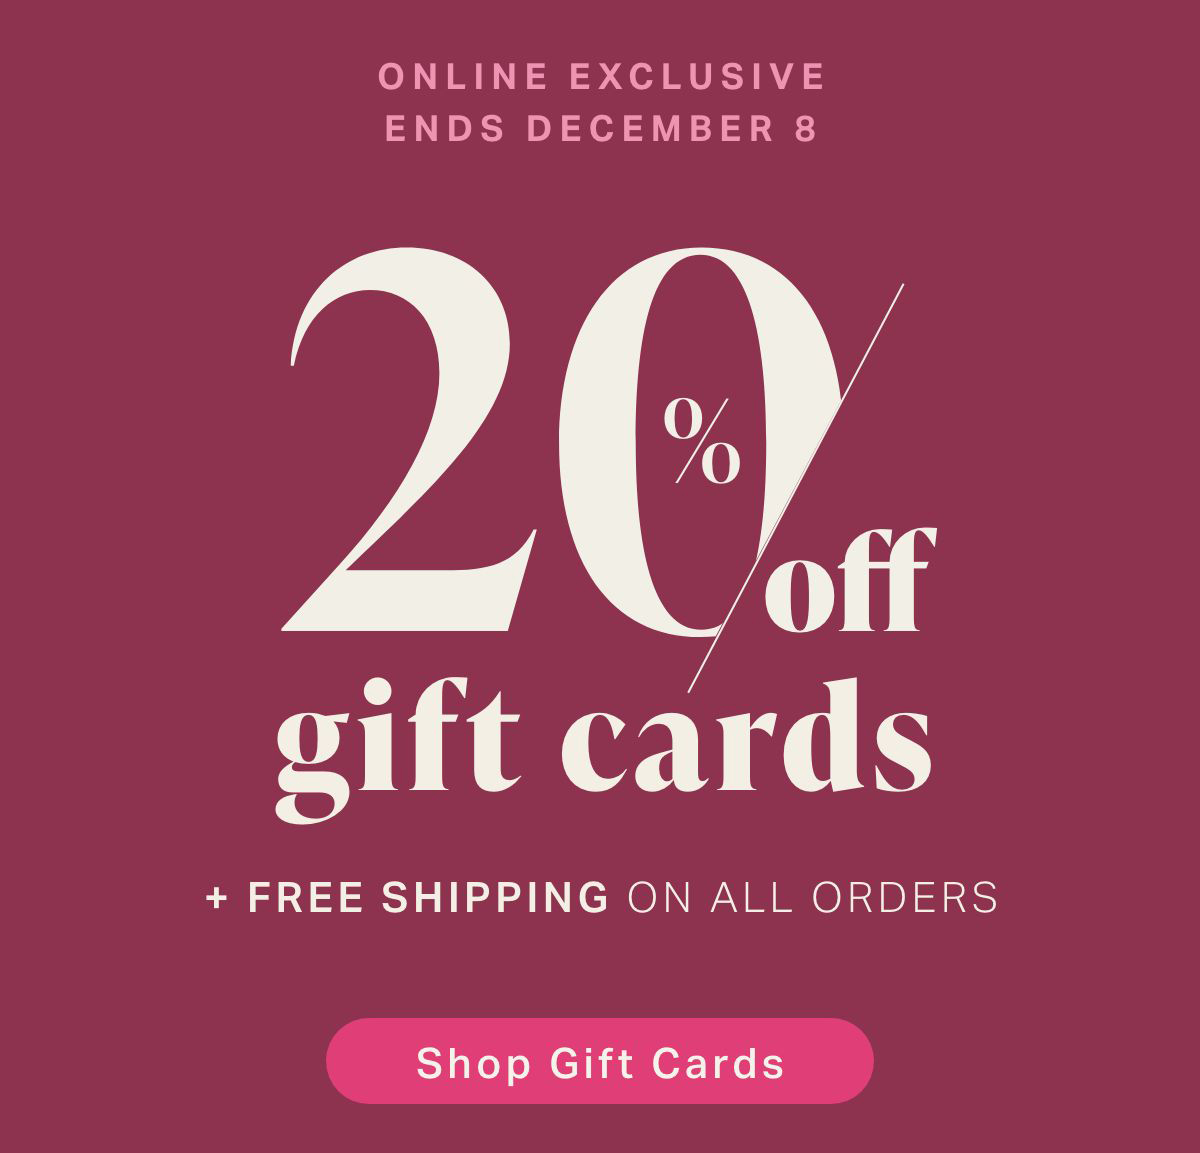 Types Of Gift Cards In Canada - CardVest